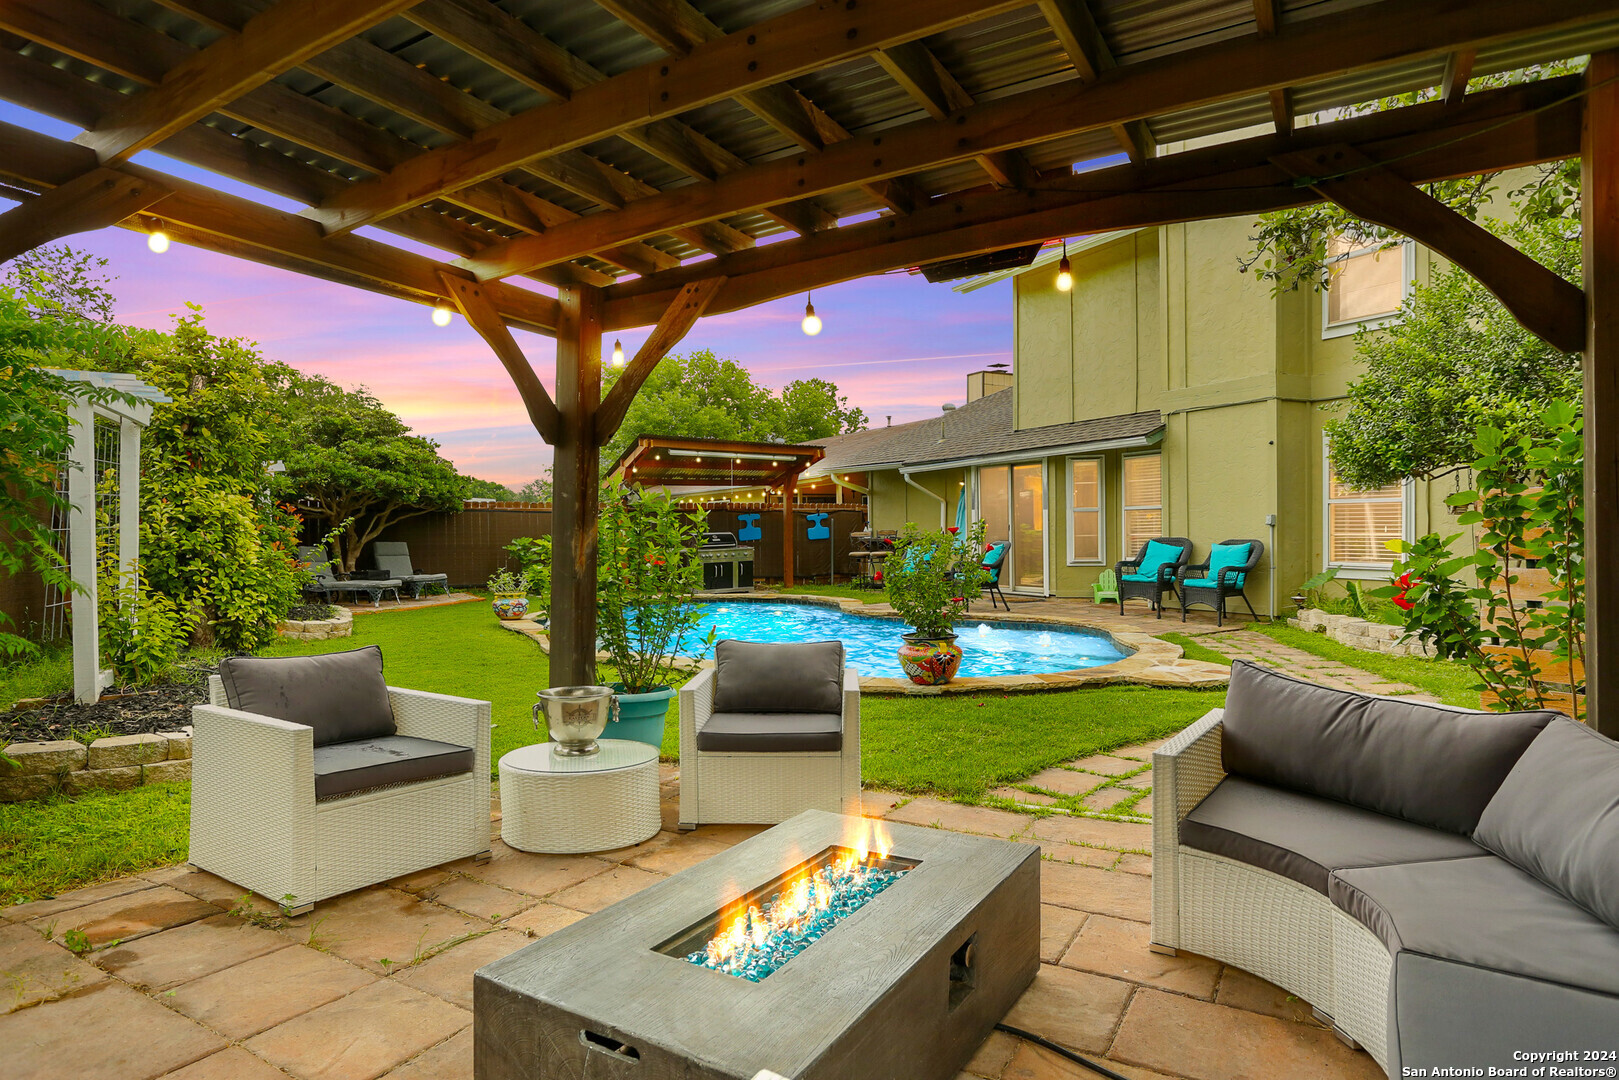 a view of a patio with couches potted plants and a large tree